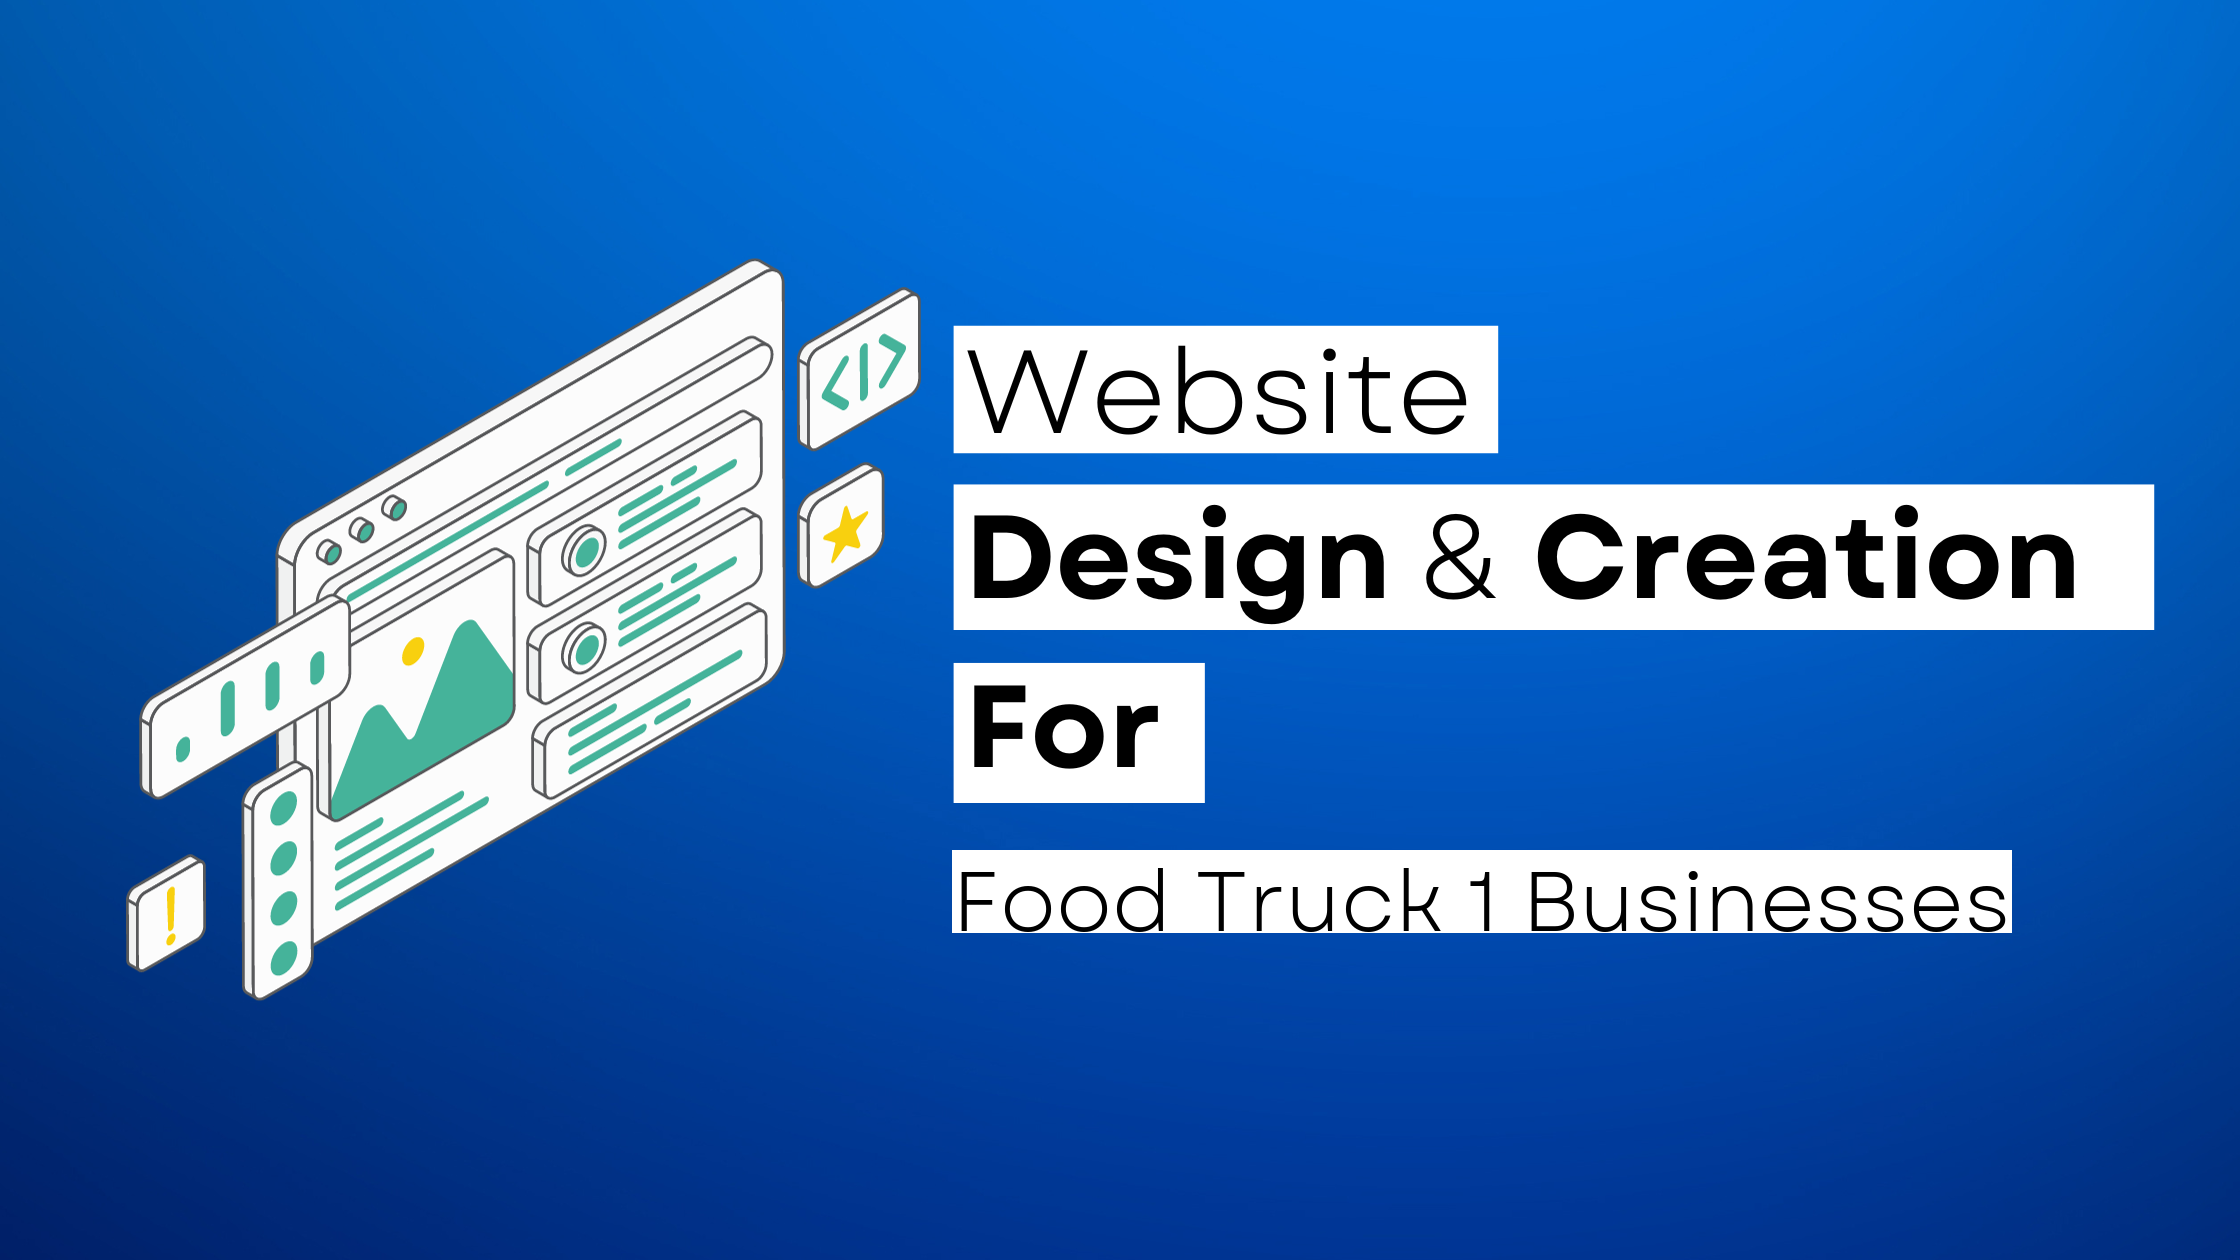 How to start a Food Truck 1 website